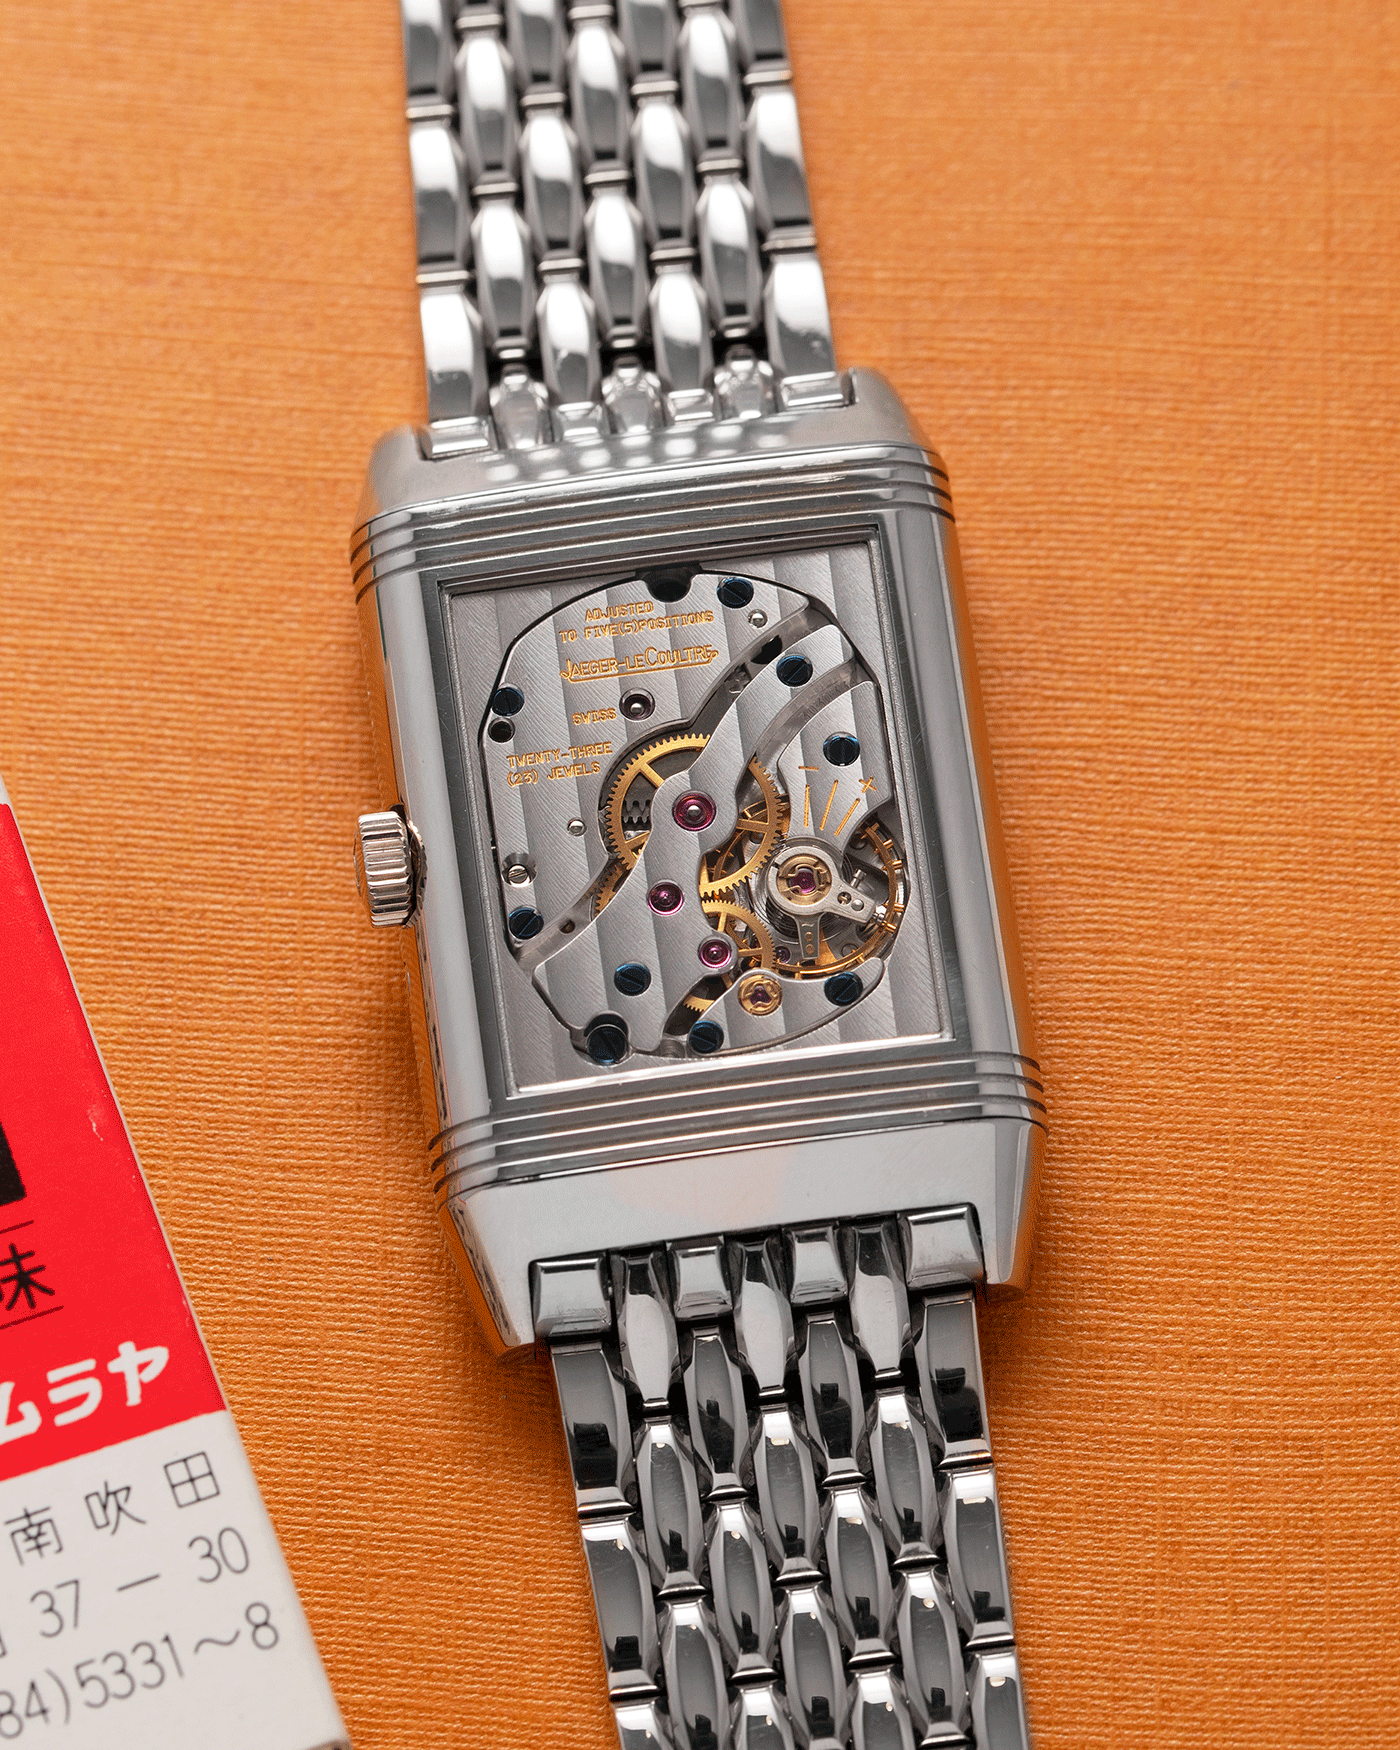 Brand: Jaeger-LeCoultre Year: 2000’s Model: Reverso Night And Day Reference Number: 270.3.63 Material: 18k White Gold Movement: Manually-Wound JLC cal. 823 Case Diameter: 26mm X 36.6mm Bracelet/Strap: 18k White Gold Jaeger LeCoultre Bracelet